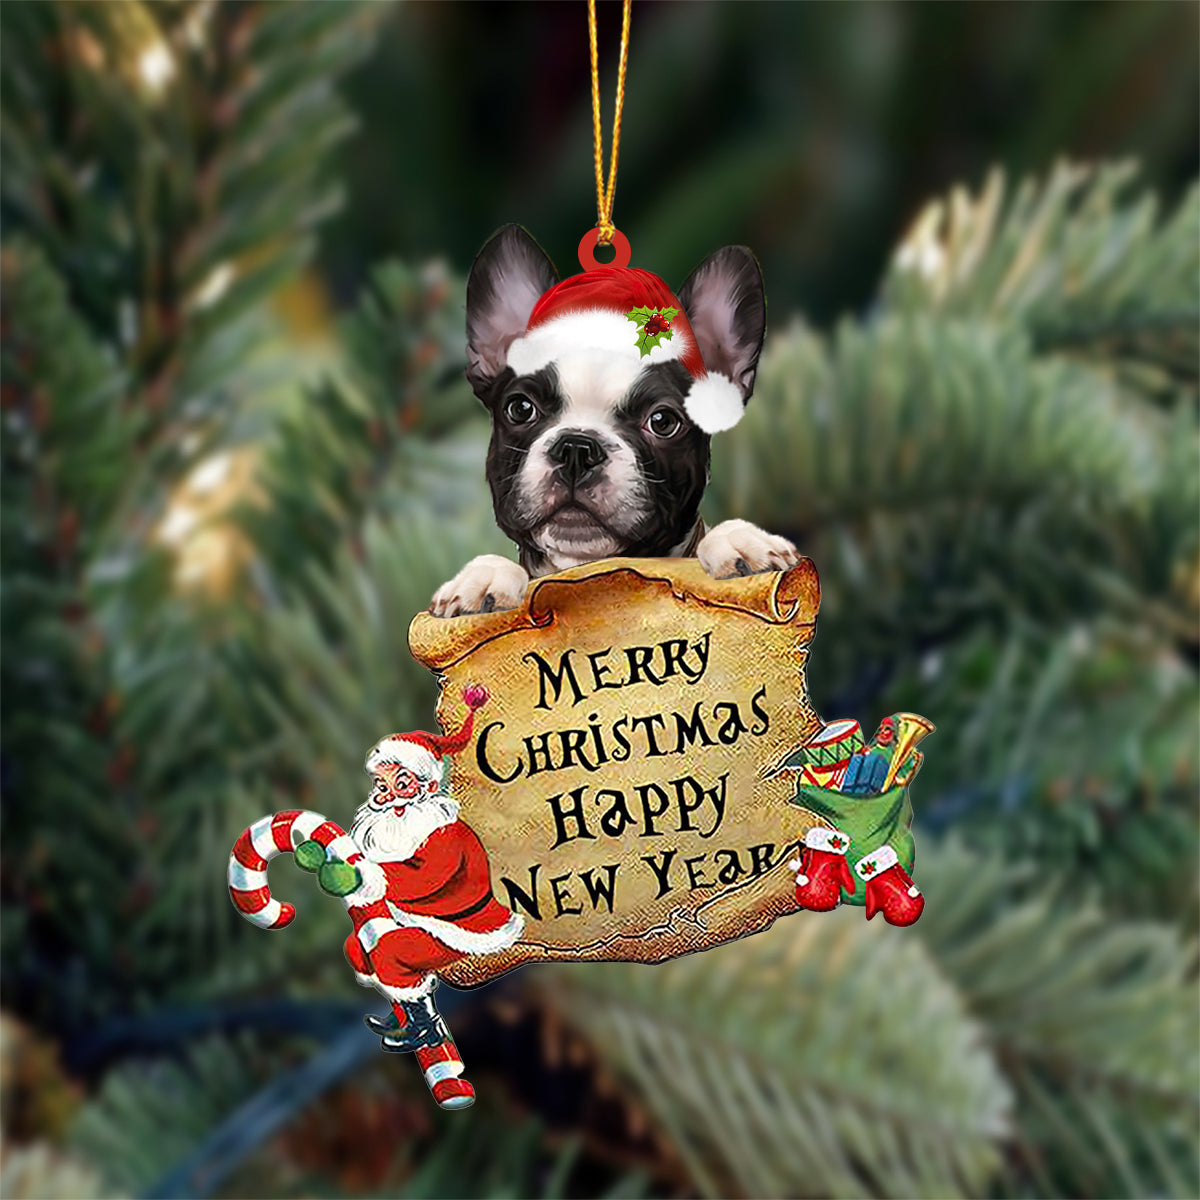 French Bulldog Merry Christmas&Happy New Year Hanging Ornament